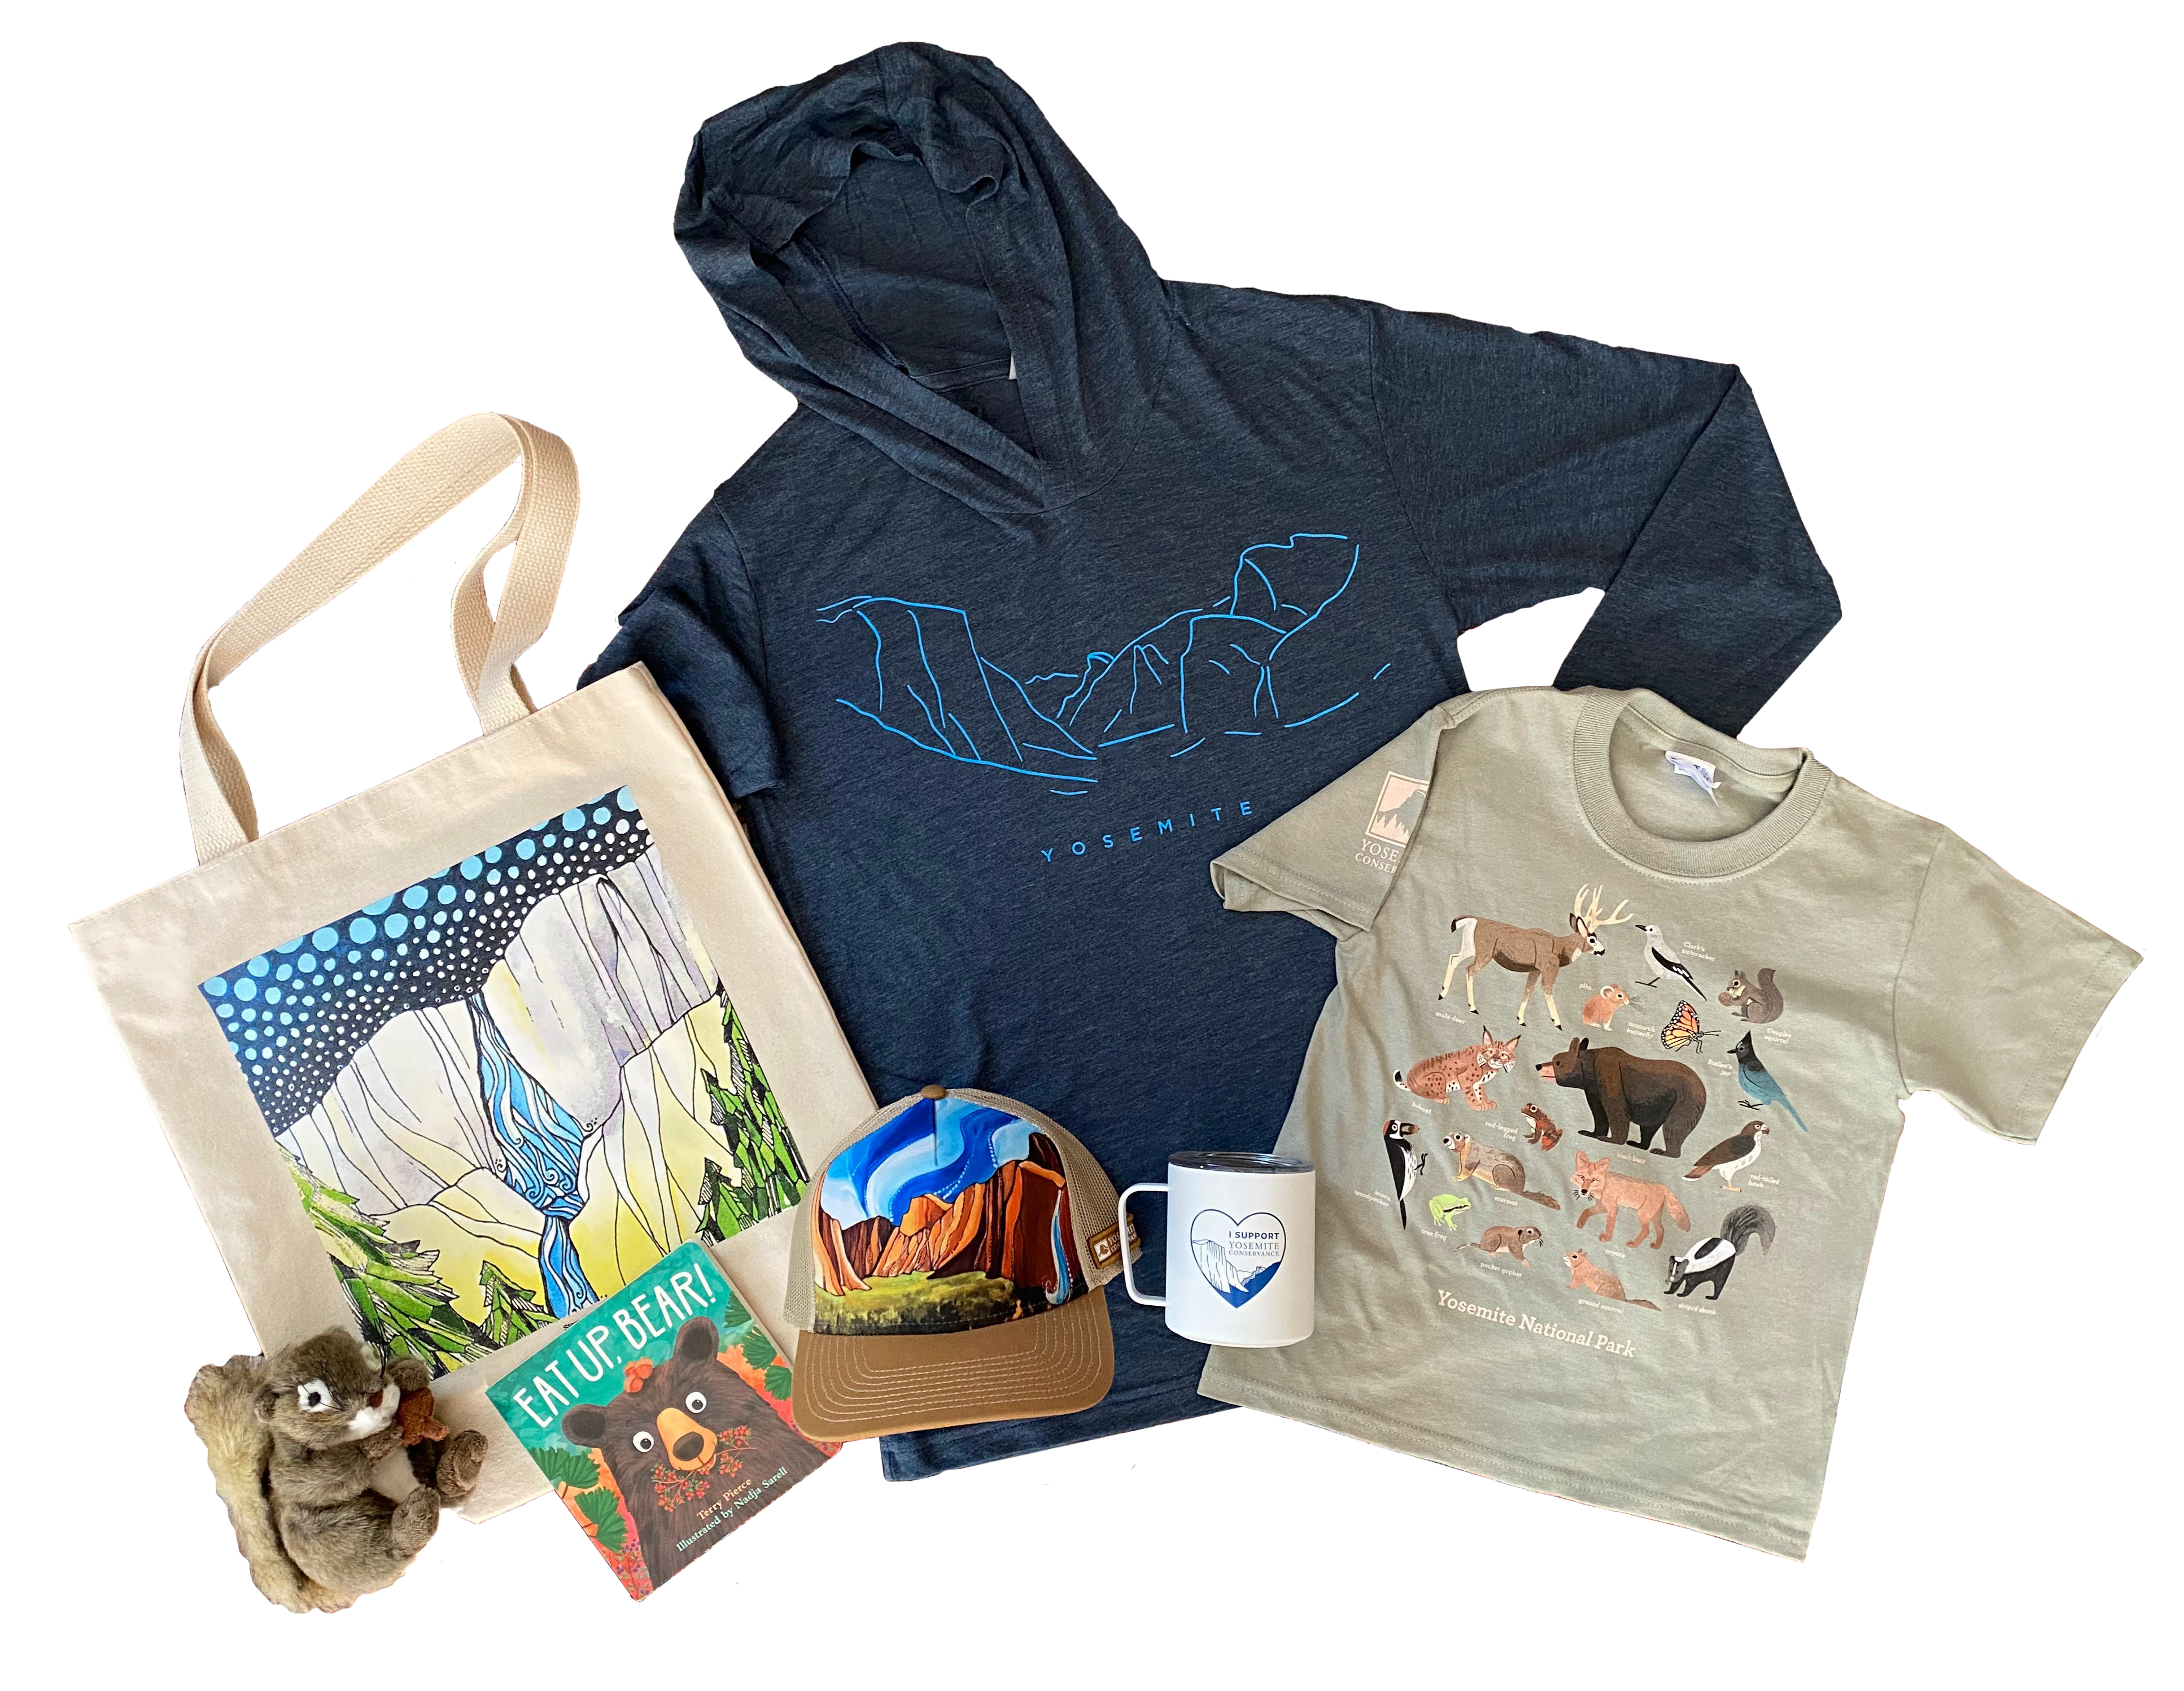 A collection of Yosemite-themed retail items arranged with a white background. Includes a hoodie, tote bag, tee shirt, mug, hat, book and stuffed animal.